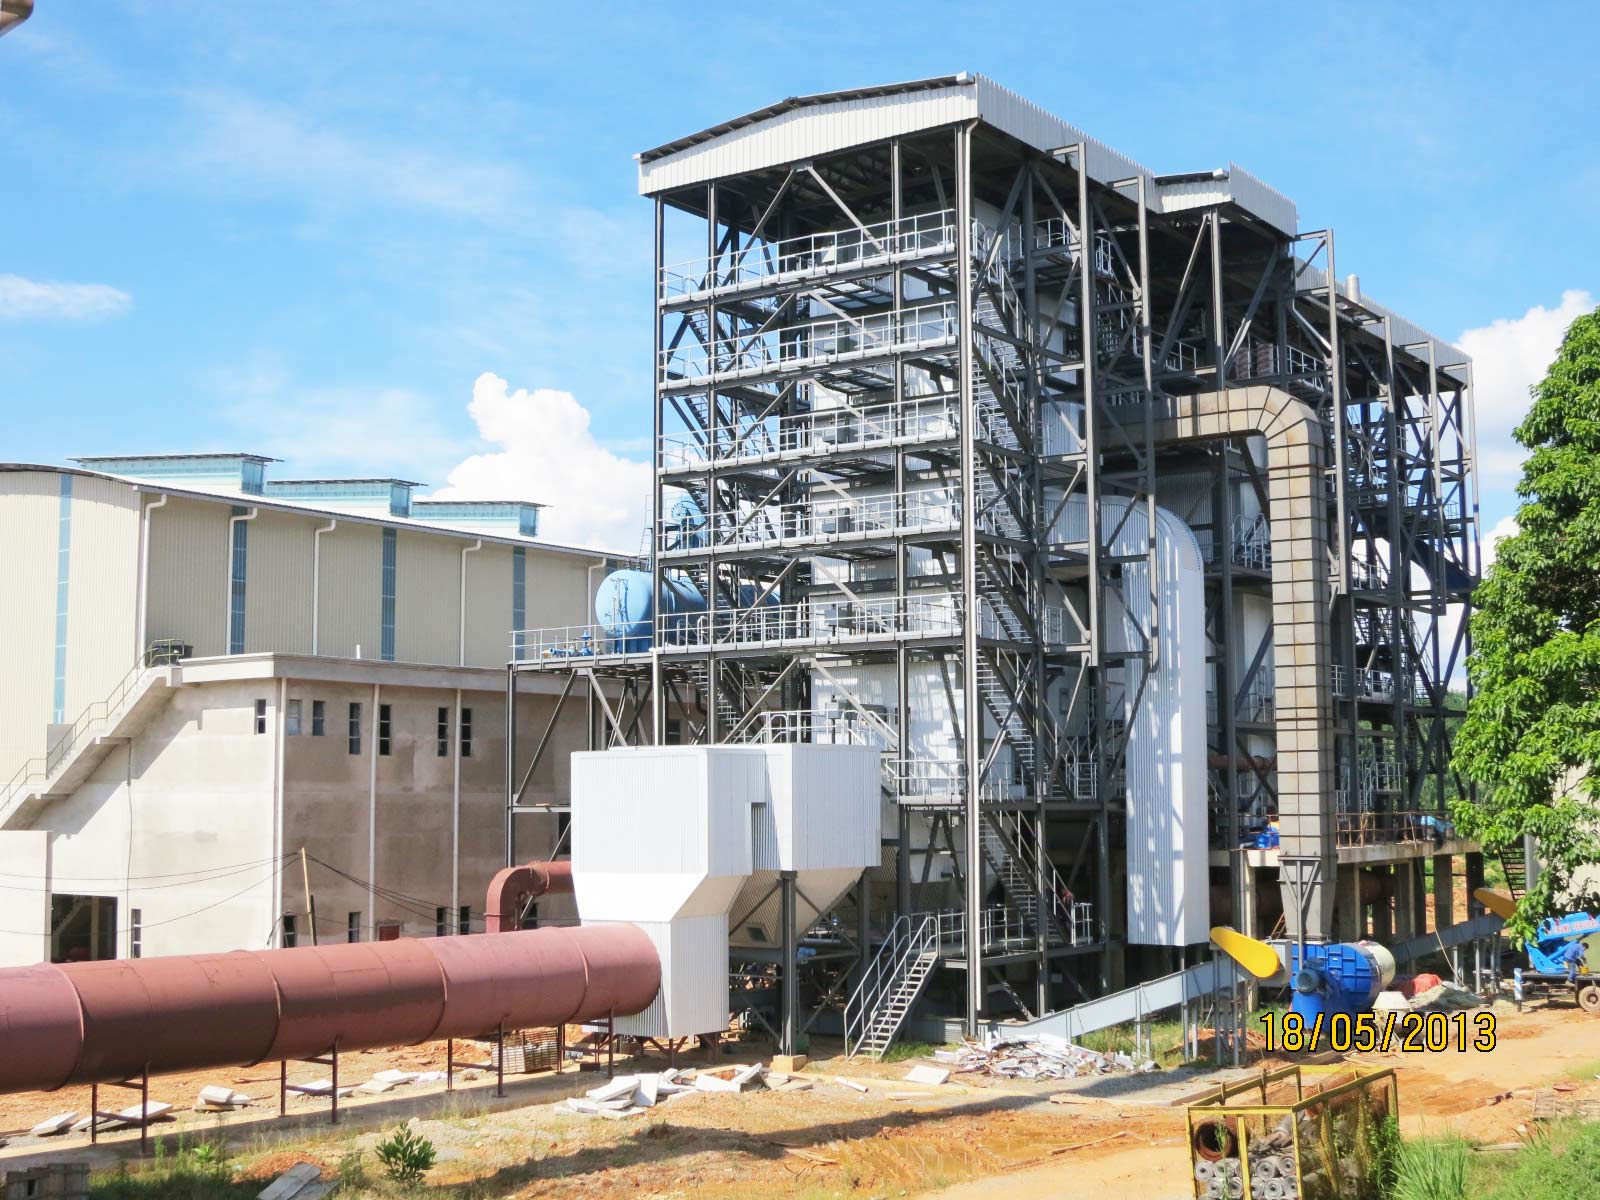 Pahang, Malaysia
Fuel: Empty Fruit Bunch 
Capacity: 10 MW, 60tons/hr boiler @ 45bar(g), 450oC with step grate